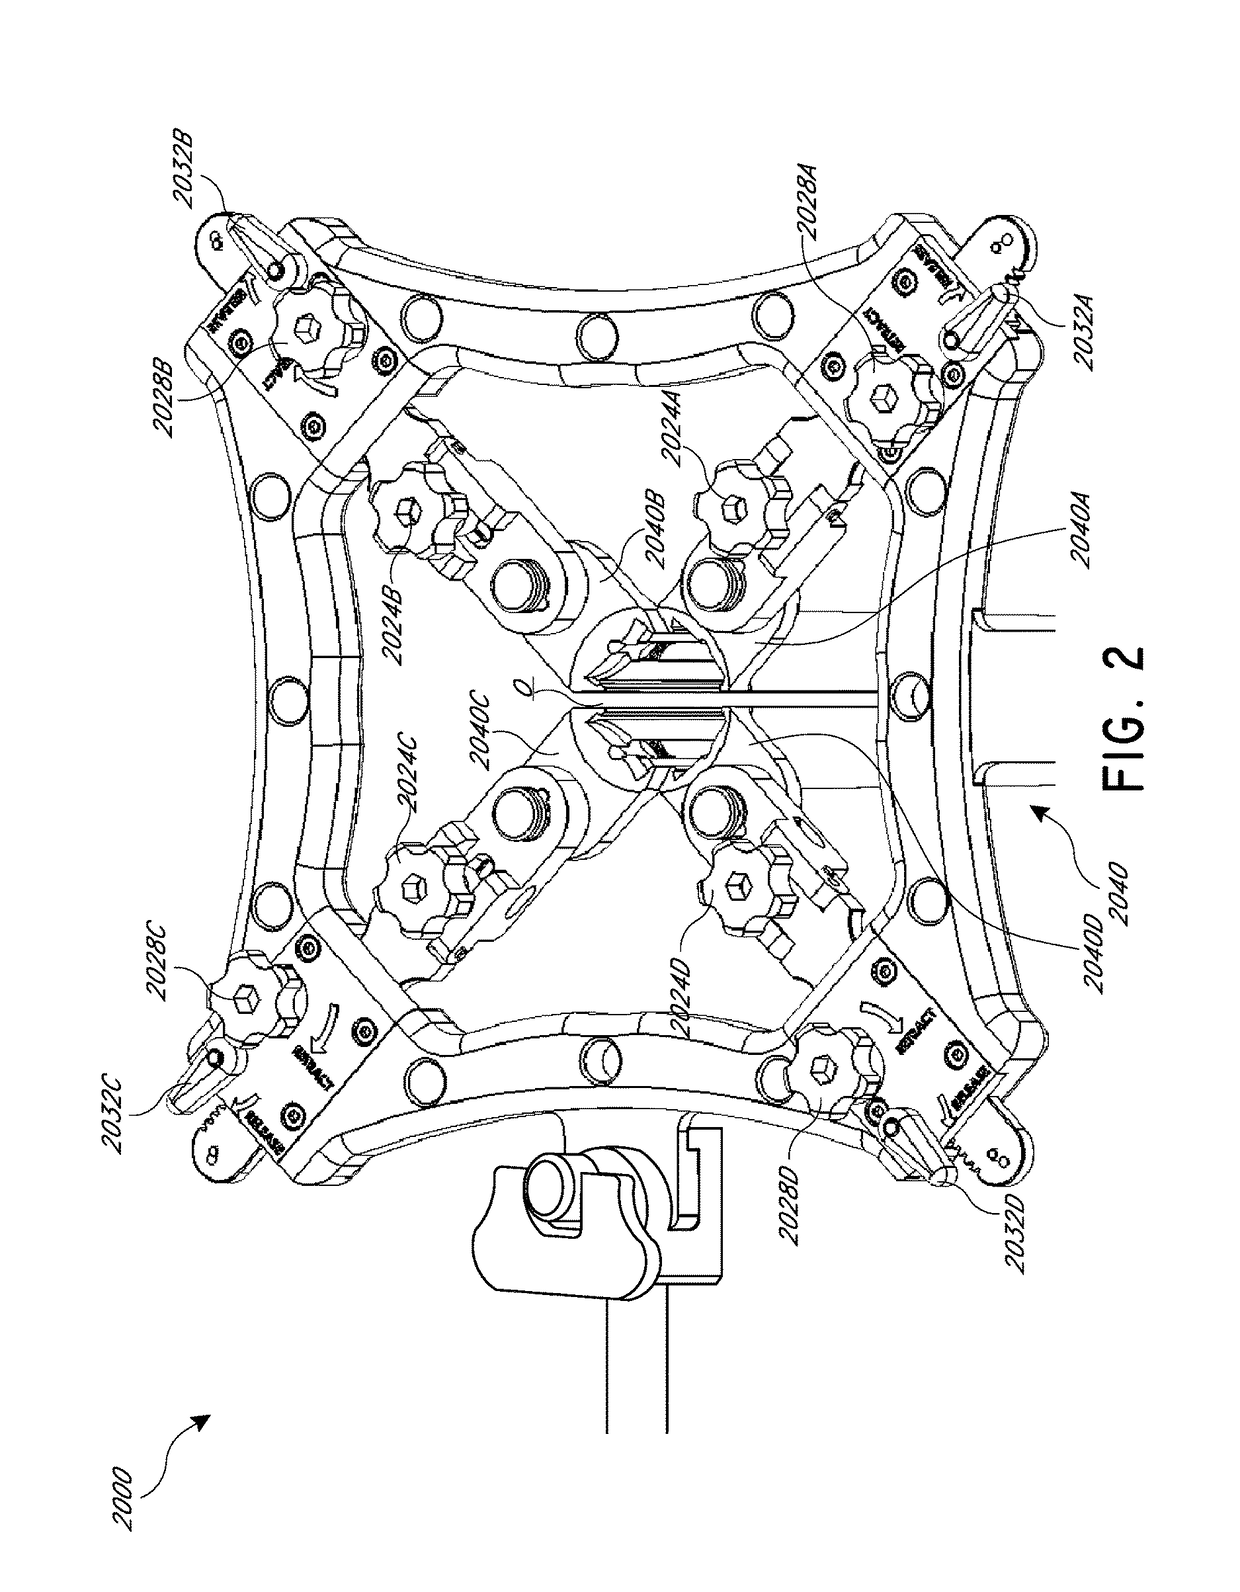 Retractor devices for minimally invasive access to the spine